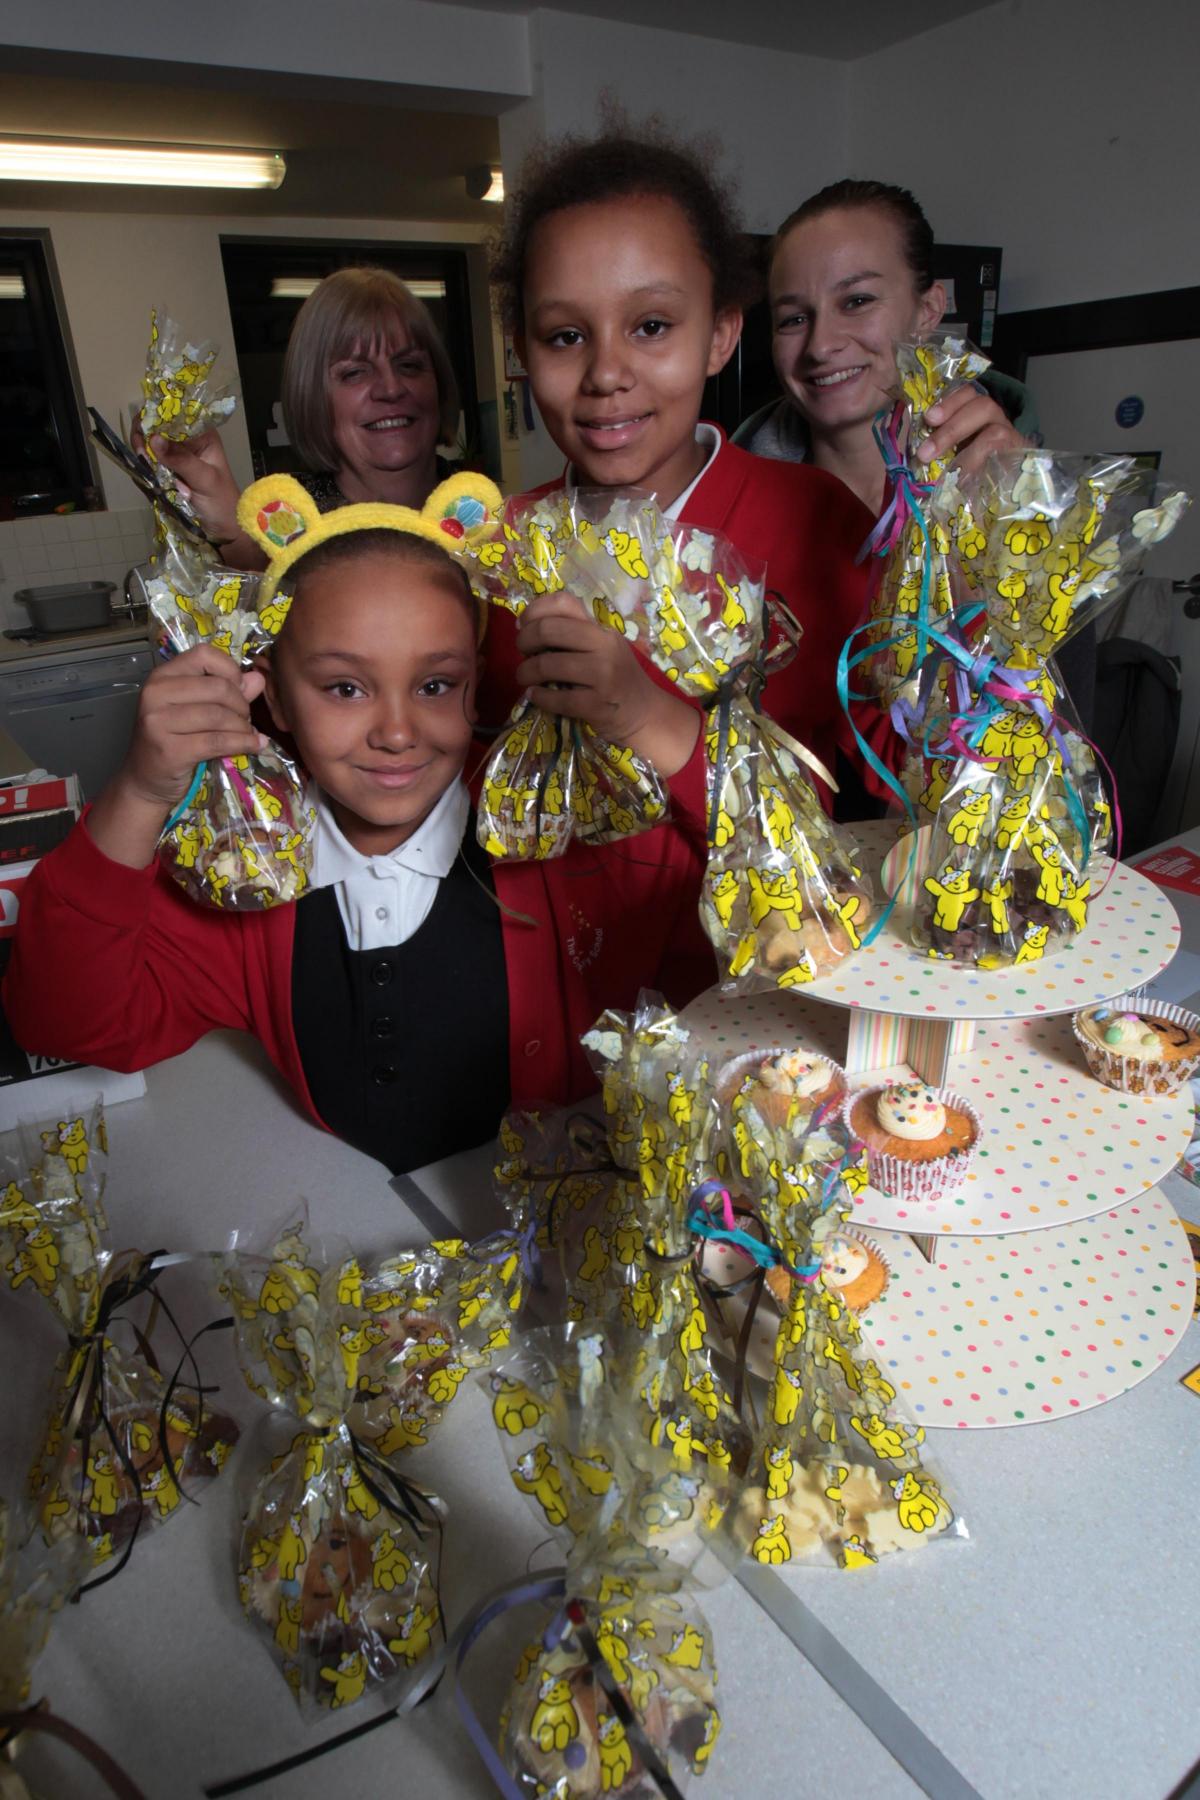 Children in Need 2014 - Pictures from Energy Youth Centre